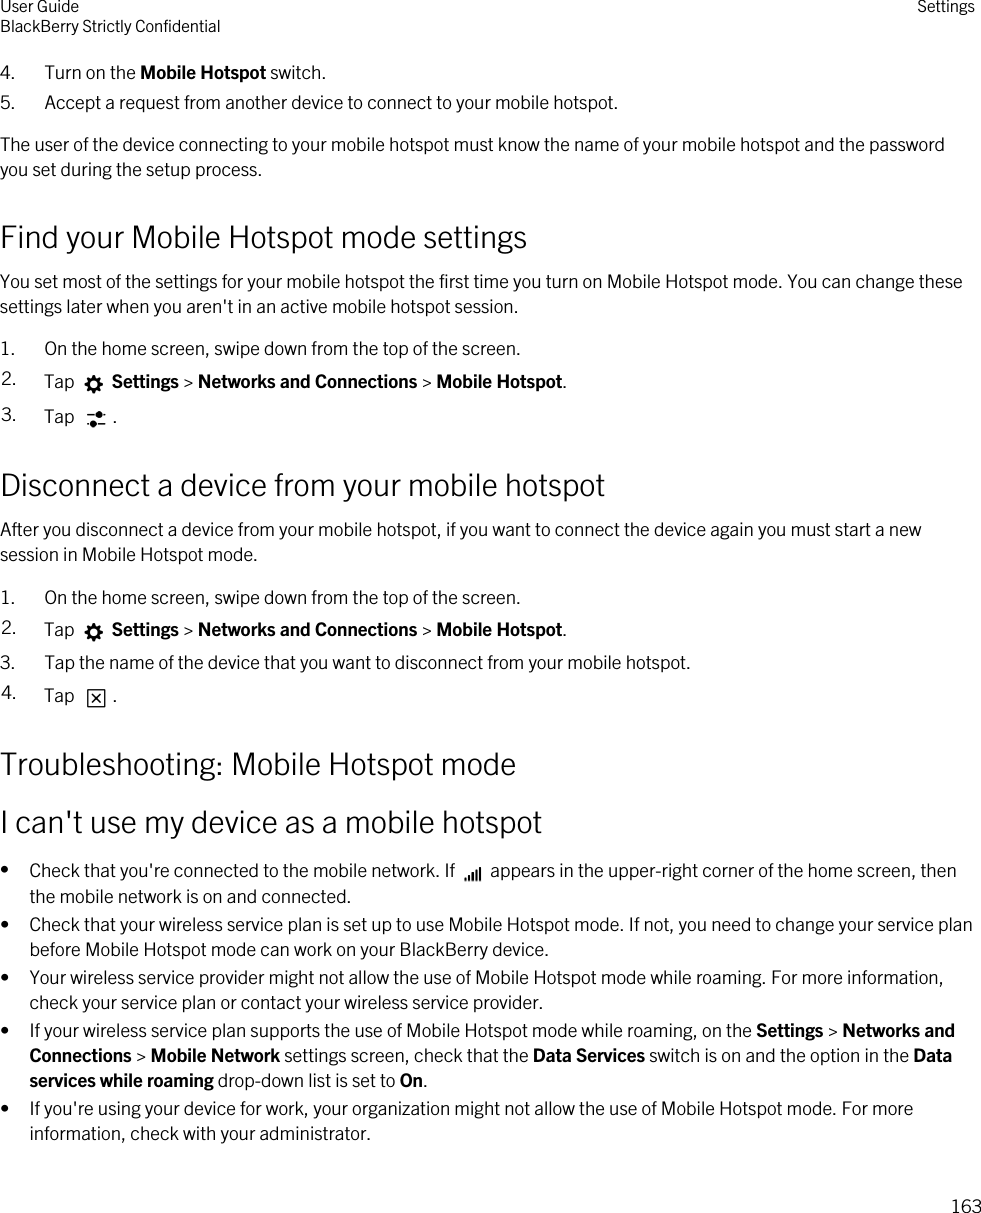 4. Turn on the Mobile Hotspot switch.5. Accept a request from another device to connect to your mobile hotspot.The user of the device connecting to your mobile hotspot must know the name of your mobile hotspot and the password you set during the setup process.Find your Mobile Hotspot mode settingsYou set most of the settings for your mobile hotspot the first time you turn on Mobile Hotspot mode. You can change these settings later when you aren&apos;t in an active mobile hotspot session.1. On the home screen, swipe down from the top of the screen.2. Tap   Settings &gt; Networks and Connections &gt; Mobile Hotspot.3. Tap  .Disconnect a device from your mobile hotspotAfter you disconnect a device from your mobile hotspot, if you want to connect the device again you must start a new session in Mobile Hotspot mode.1. On the home screen, swipe down from the top of the screen.2. Tap   Settings &gt; Networks and Connections &gt; Mobile Hotspot.3. Tap the name of the device that you want to disconnect from your mobile hotspot.4. Tap  .Troubleshooting: Mobile Hotspot modeI can&apos;t use my device as a mobile hotspot•Check that you&apos;re connected to the mobile network. If   appears in the upper-right corner of the home screen, then the mobile network is on and connected.• Check that your wireless service plan is set up to use Mobile Hotspot mode. If not, you need to change your service plan before Mobile Hotspot mode can work on your BlackBerry device.• Your wireless service provider might not allow the use of Mobile Hotspot mode while roaming. For more information, check your service plan or contact your wireless service provider.• If your wireless service plan supports the use of Mobile Hotspot mode while roaming, on the Settings &gt; Networks and Connections &gt; Mobile Network settings screen, check that the Data Services switch is on and the option in the Data services while roaming drop-down list is set to On.• If you&apos;re using your device for work, your organization might not allow the use of Mobile Hotspot mode. For more information, check with your administrator.User GuideBlackBerry Strictly Confidential Settings163